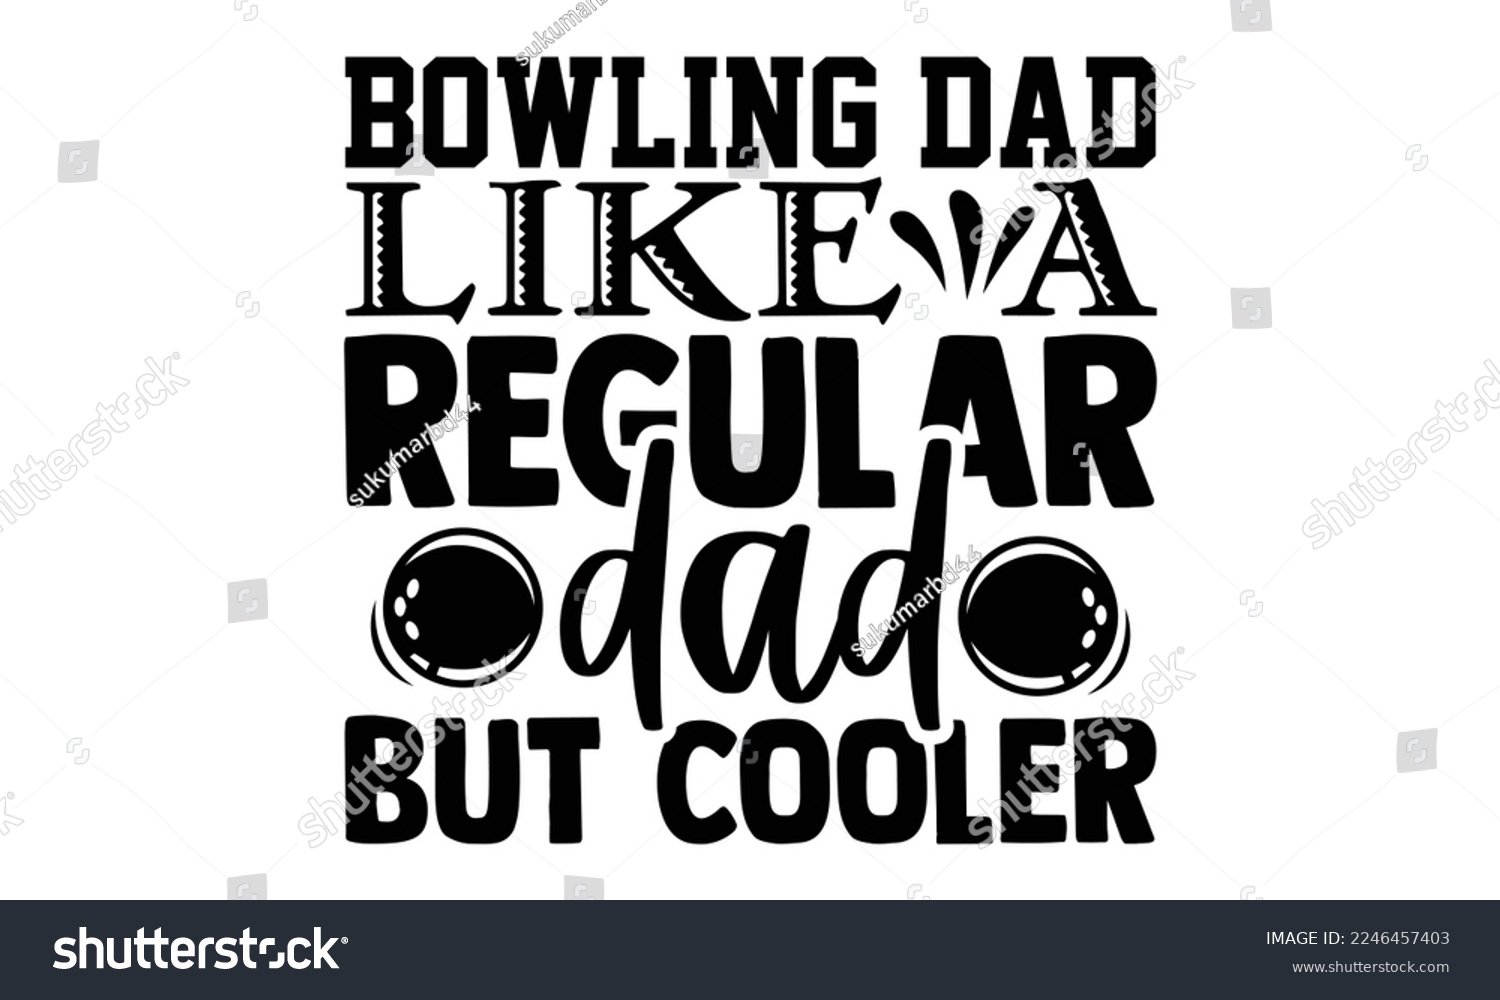 SVG of Bowling Dad Like A Normal Dad Just Cooler - Bowling T-shirt Design, eps, svg Files for Cutting, Calligraphy graphic design, Hand drawn lettering phrase isolated on white background svg